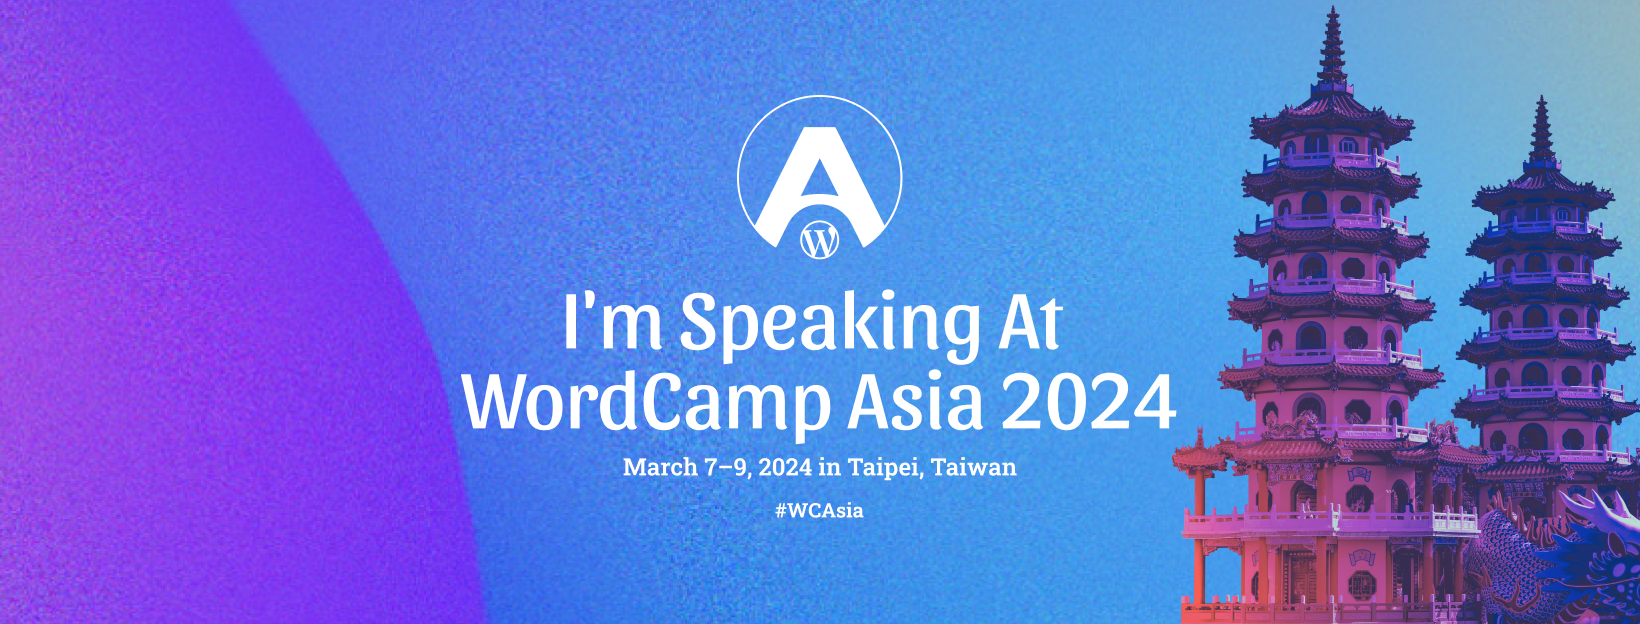 A branded WordCamp Asia banner that reads "I'm speaking at WordCamp Asia 2024".